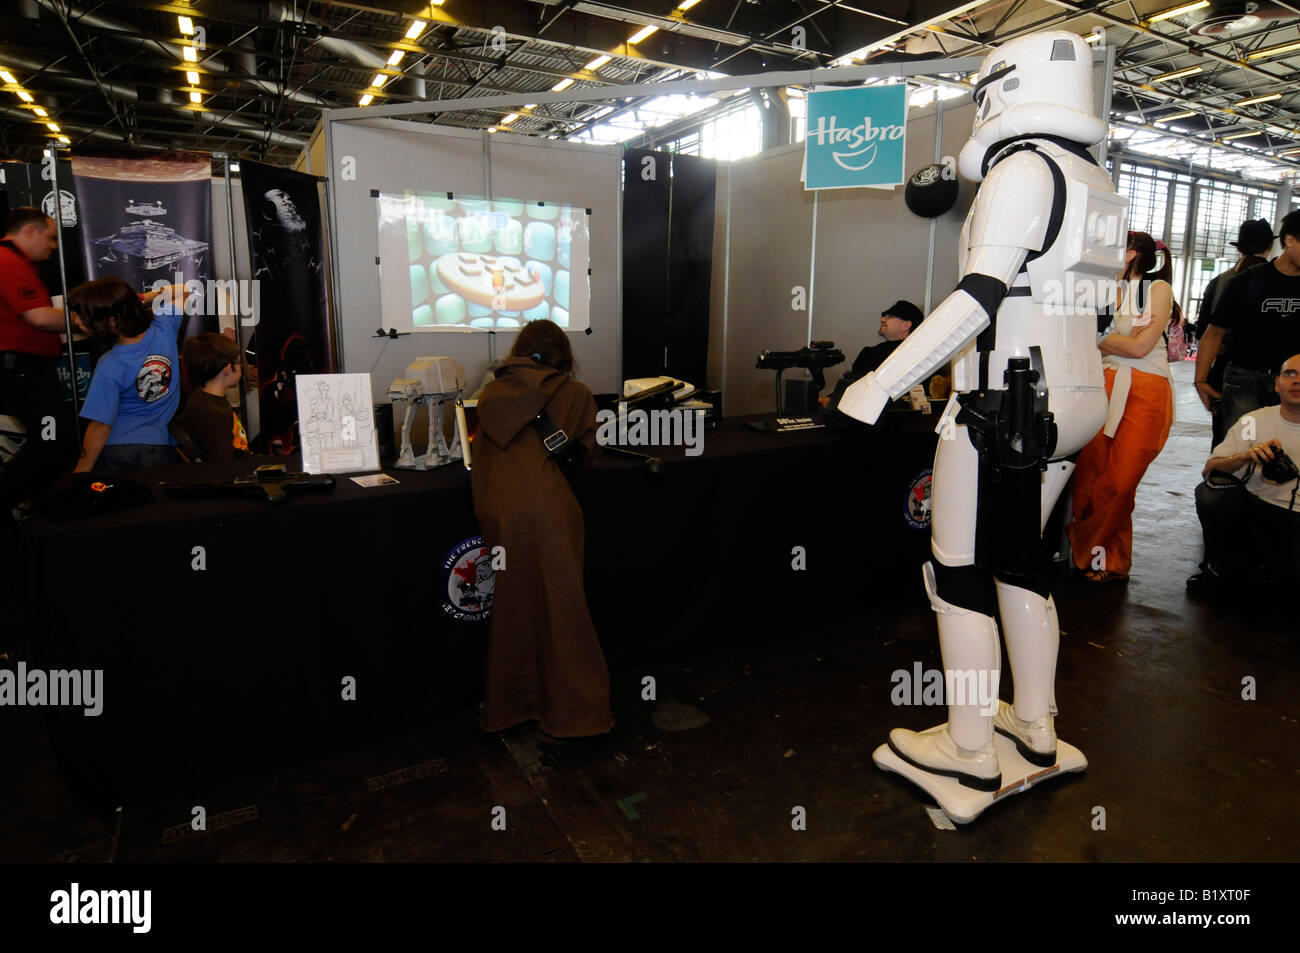 A man dressed as a Starwars trooper playing the Nintendo Wii fitness game during the Japan Expo exhibition fair. Stock Photo